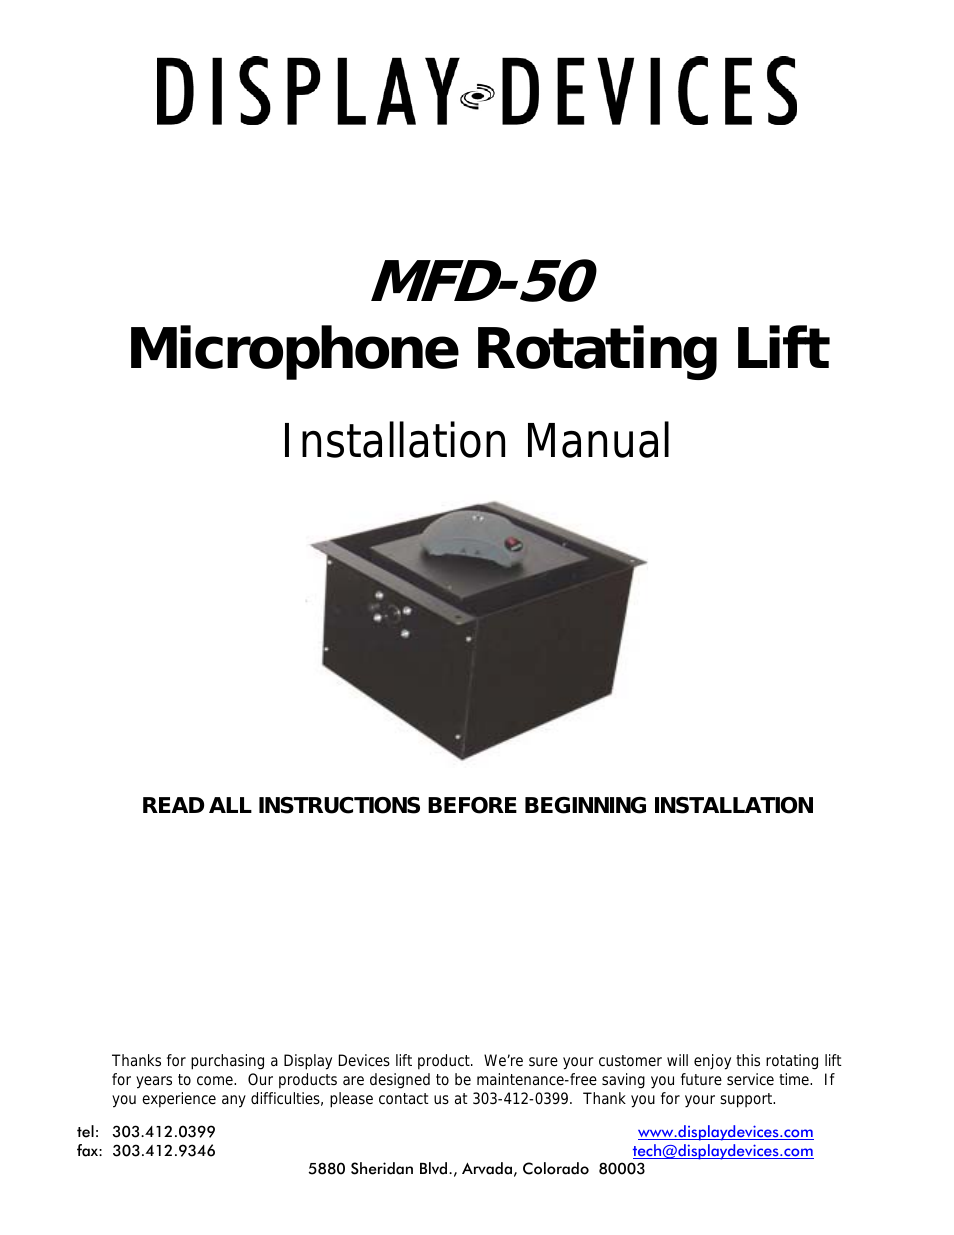 MFD-50 Microphone Table Lift